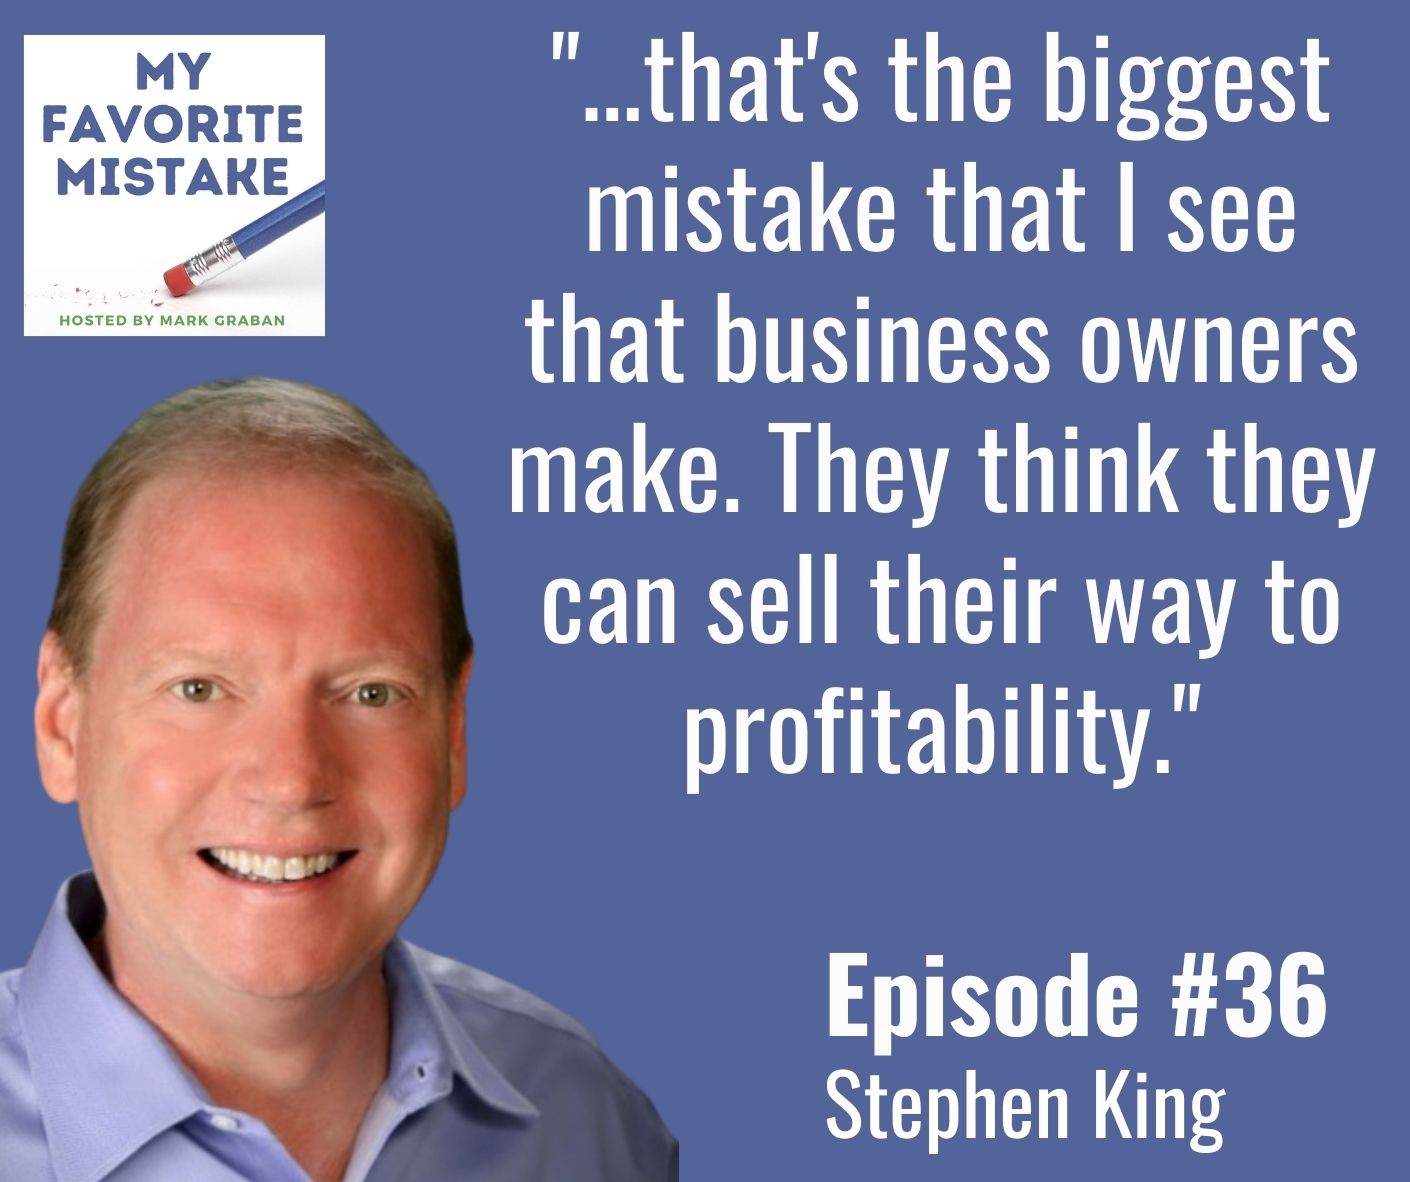 "...that's the biggest mistake that I see that business owners make. They think they can sell their way to profitability."